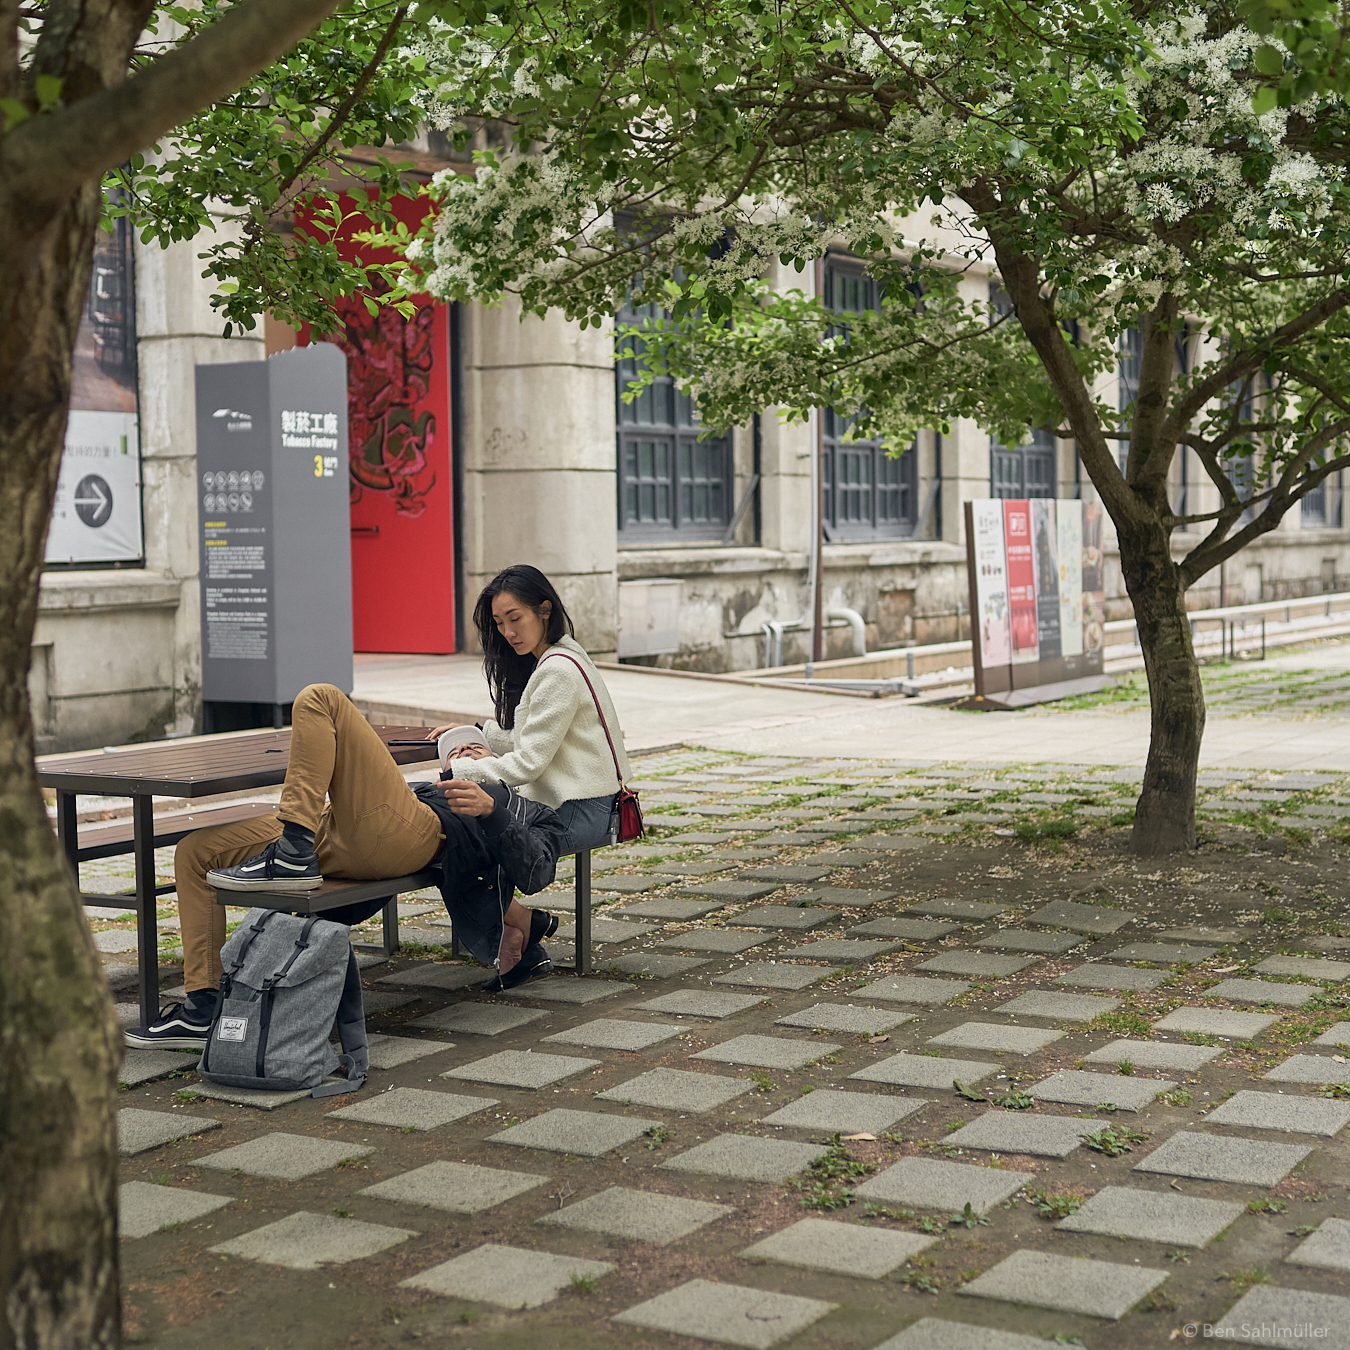 A couple on a bench, he is laying his head on her leg, she looks at him, while her hand caresses his hair.